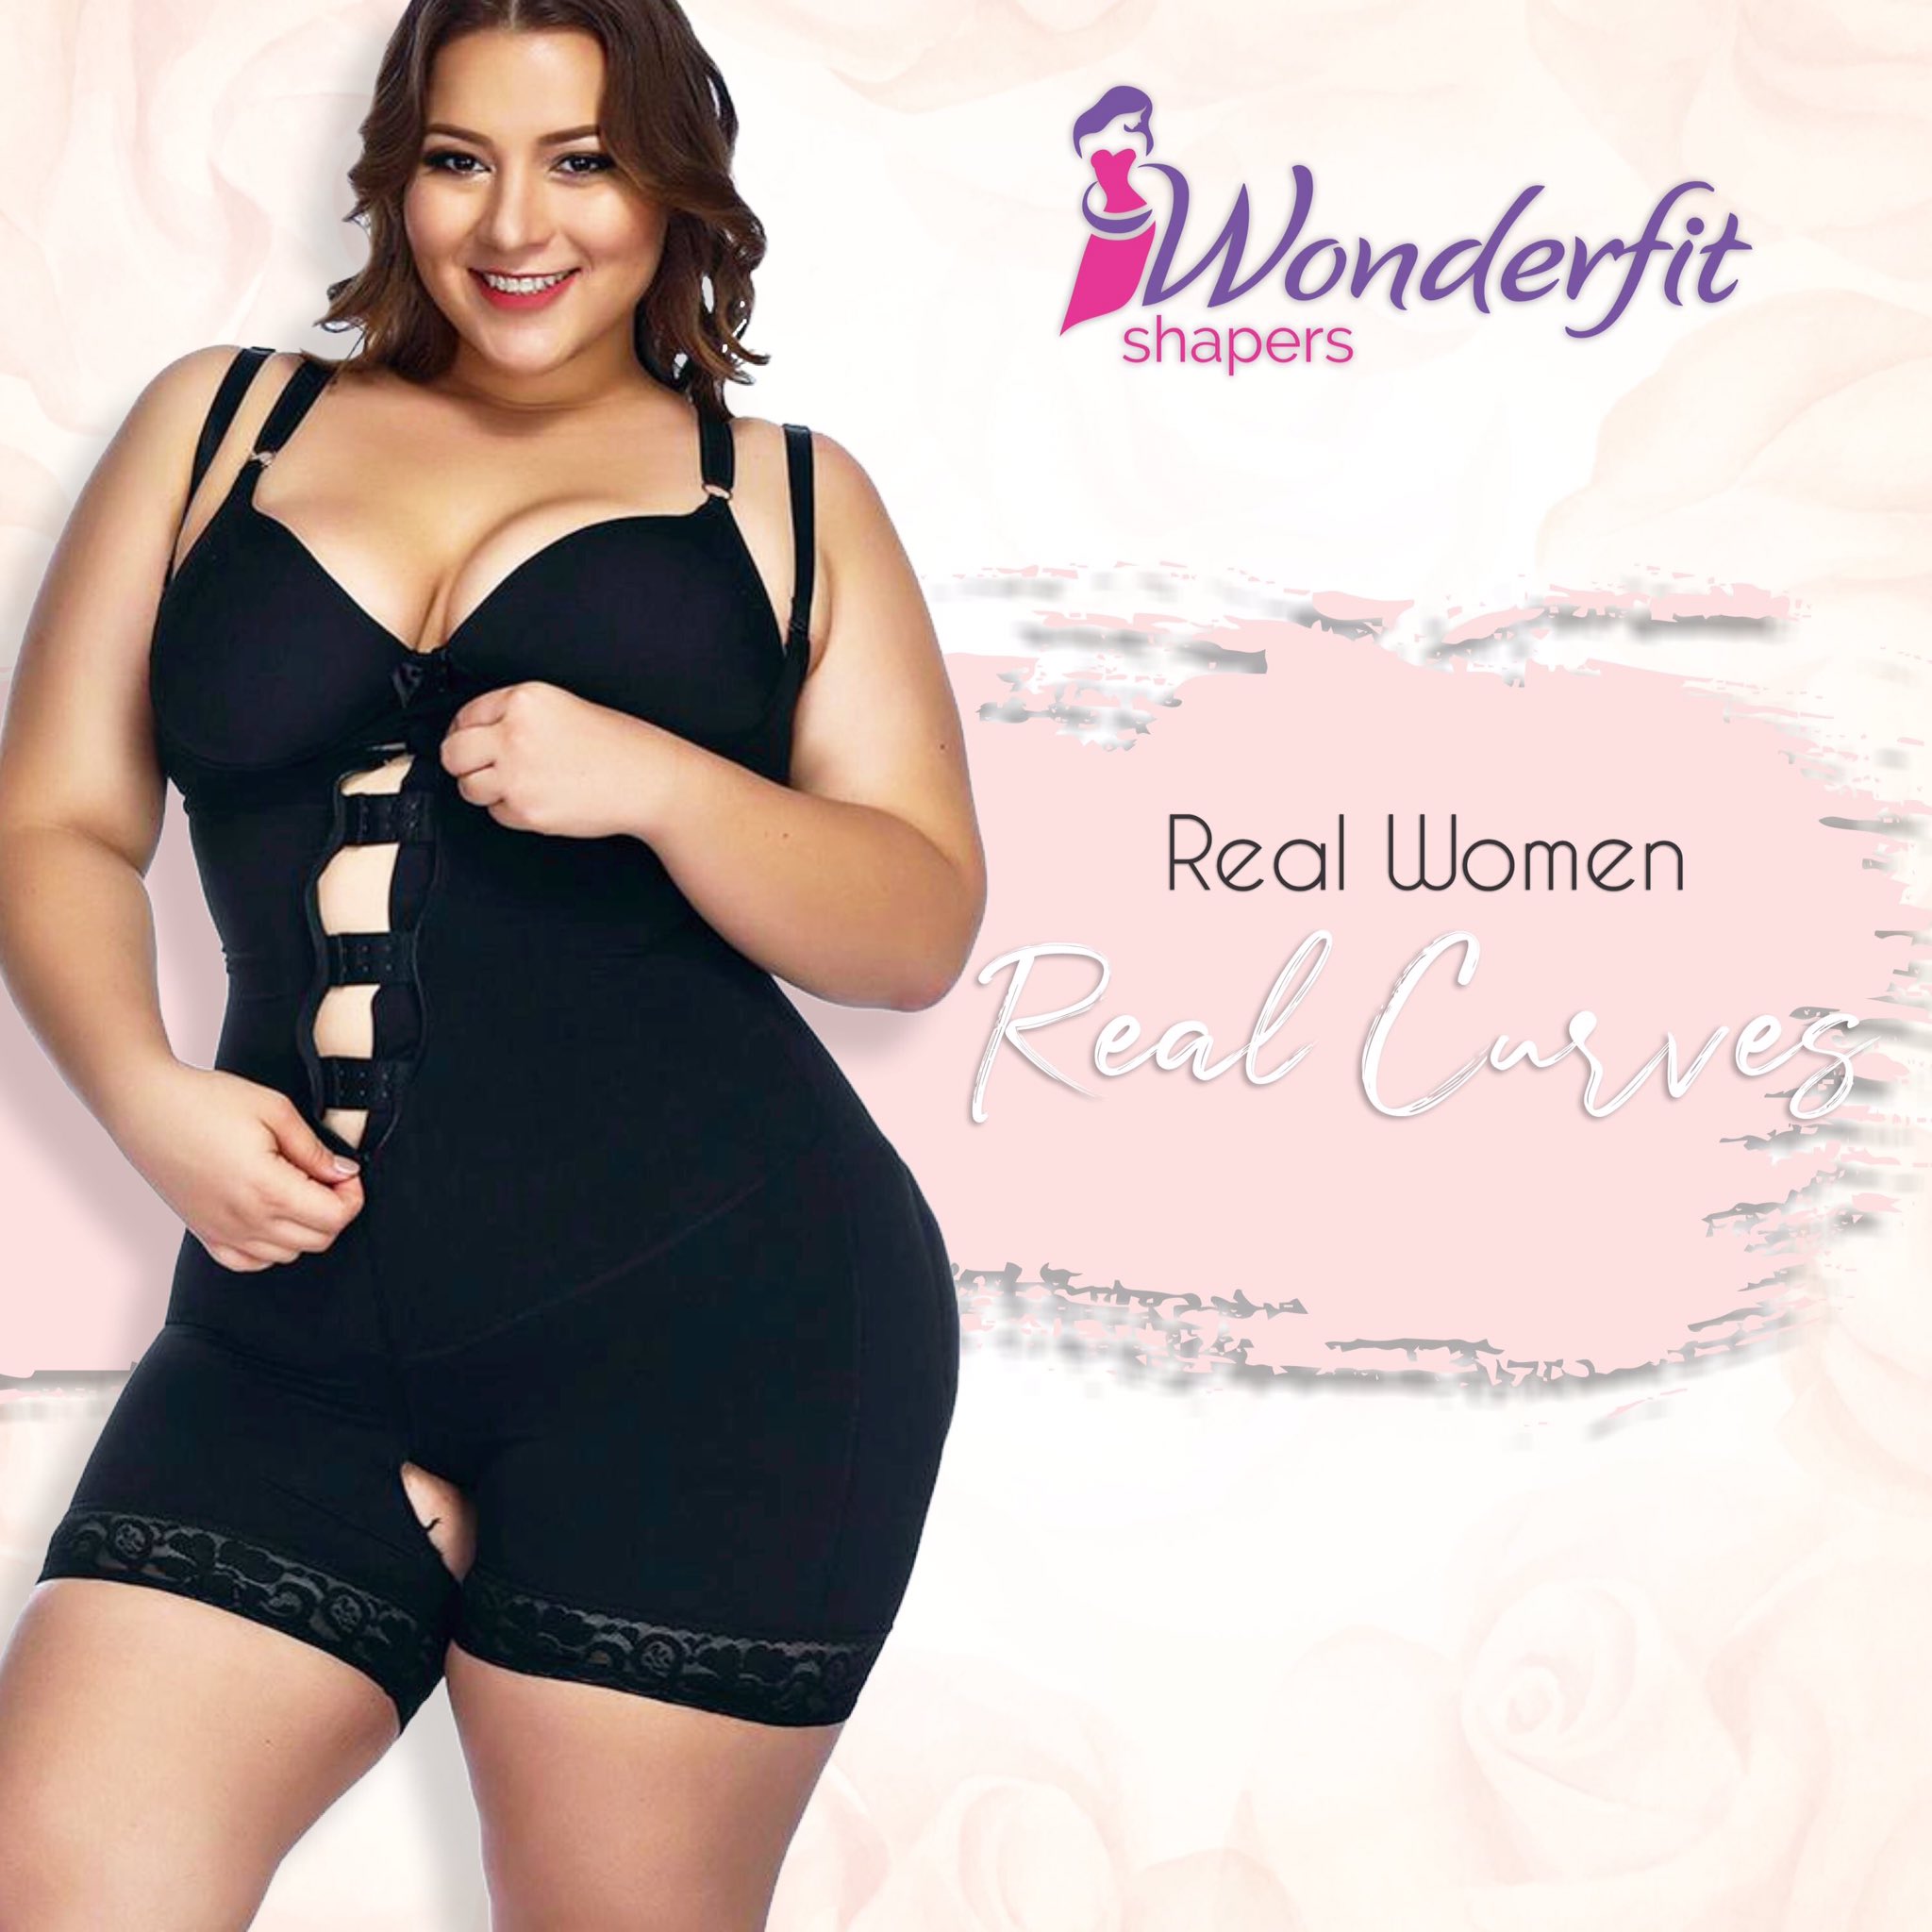 Wonderfit Shapers on X: Real women have curves! We carry all